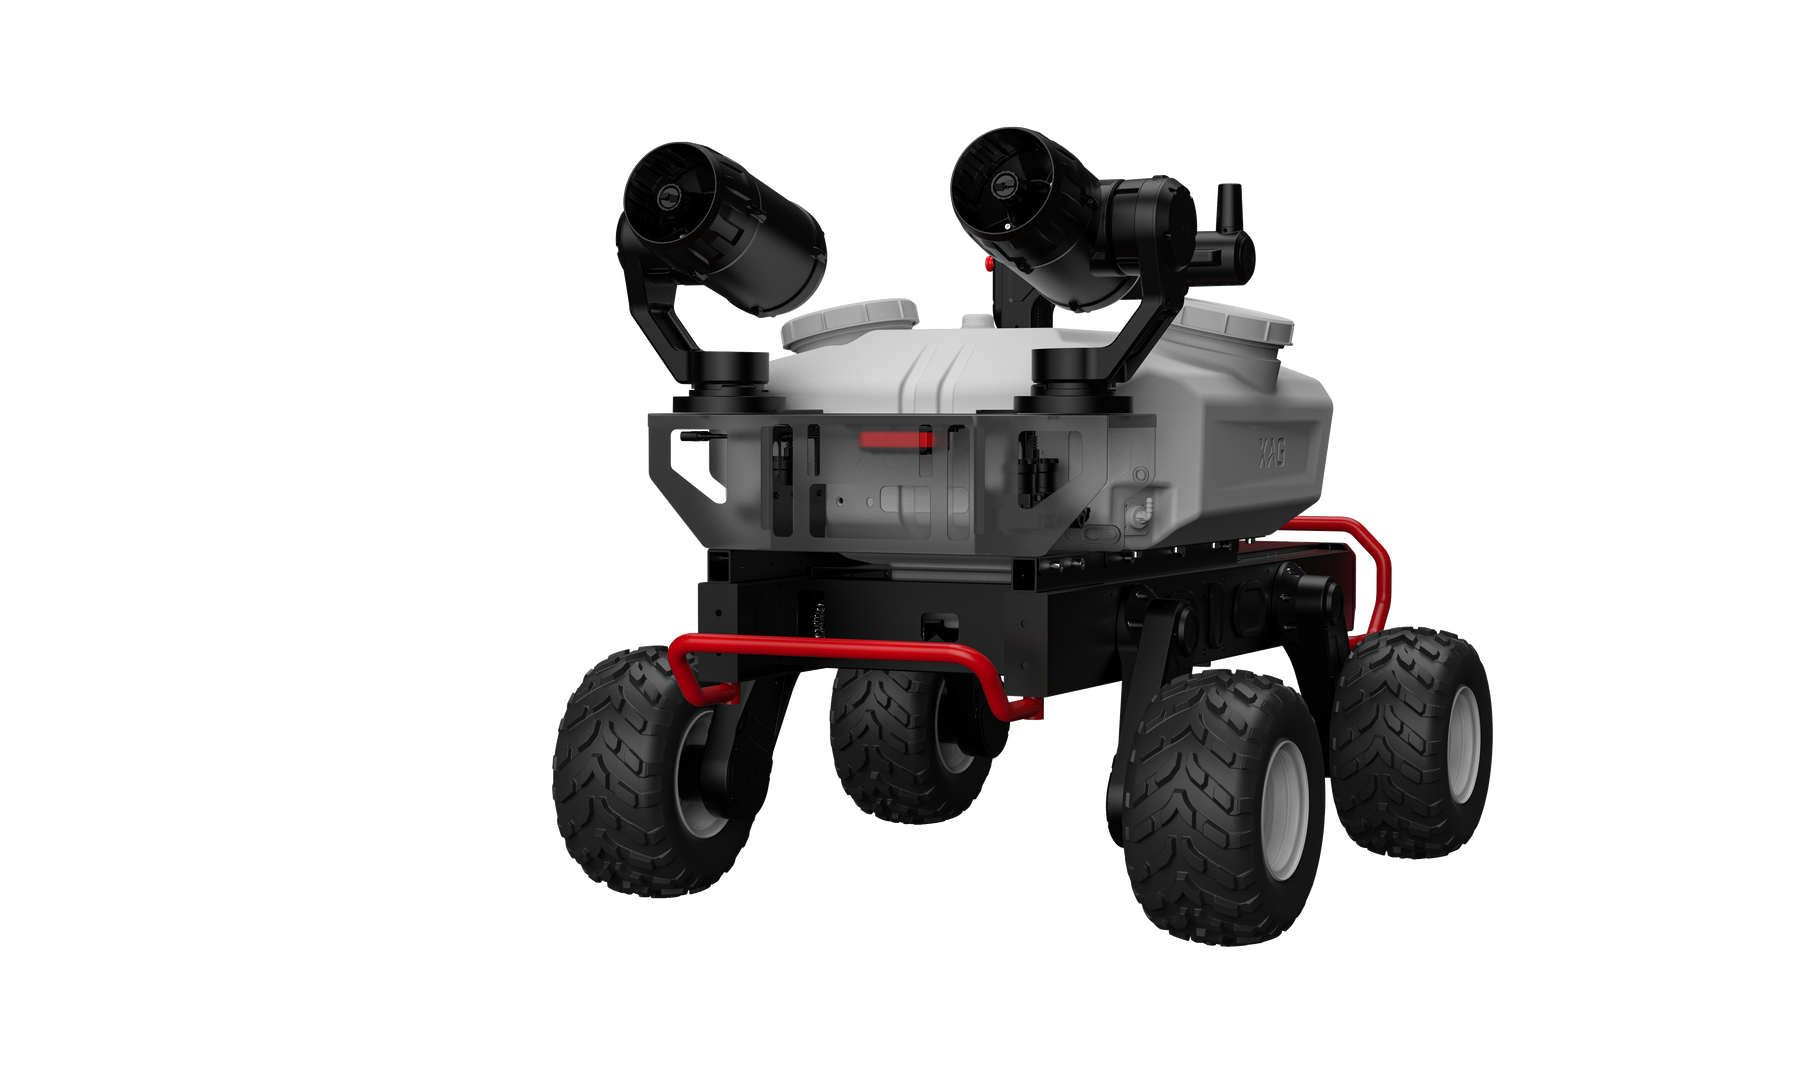 NEW XAG R150 Unmanned Ground Vehicle